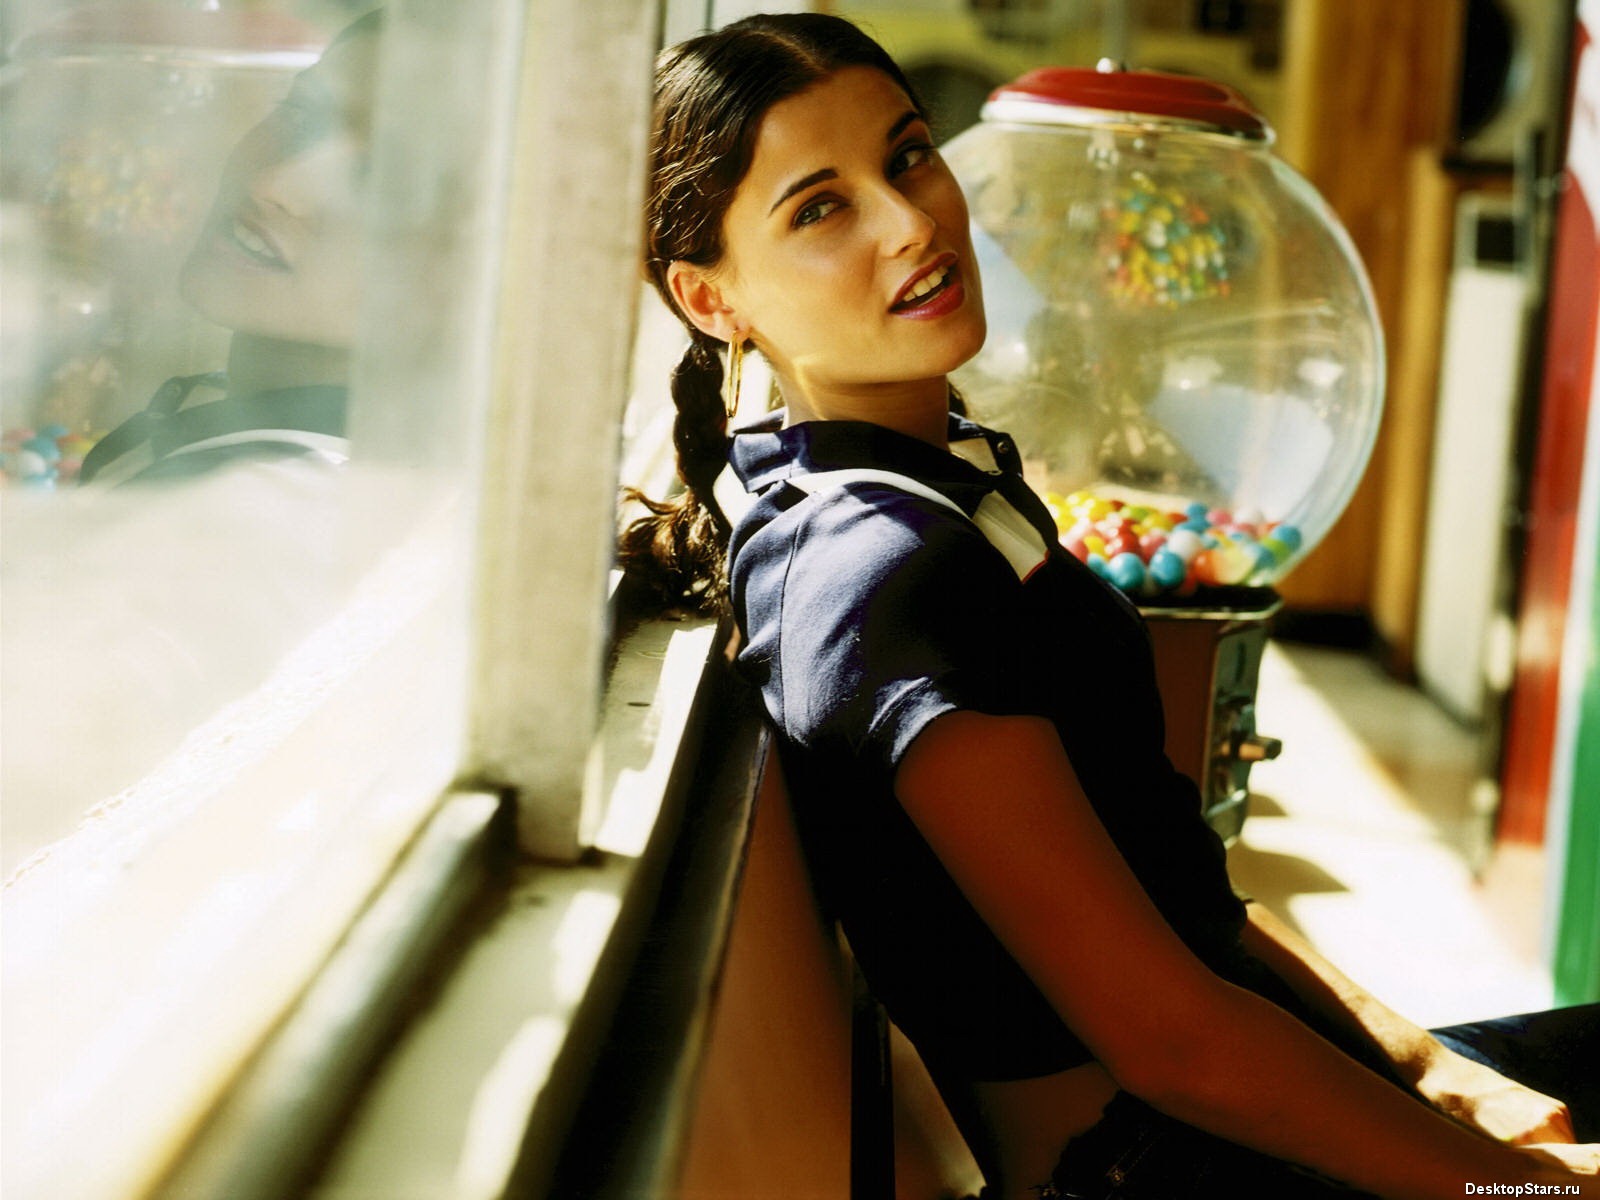 Nelly Furtado #011 - 1600x1200 Wallpapers Pictures Photos Images